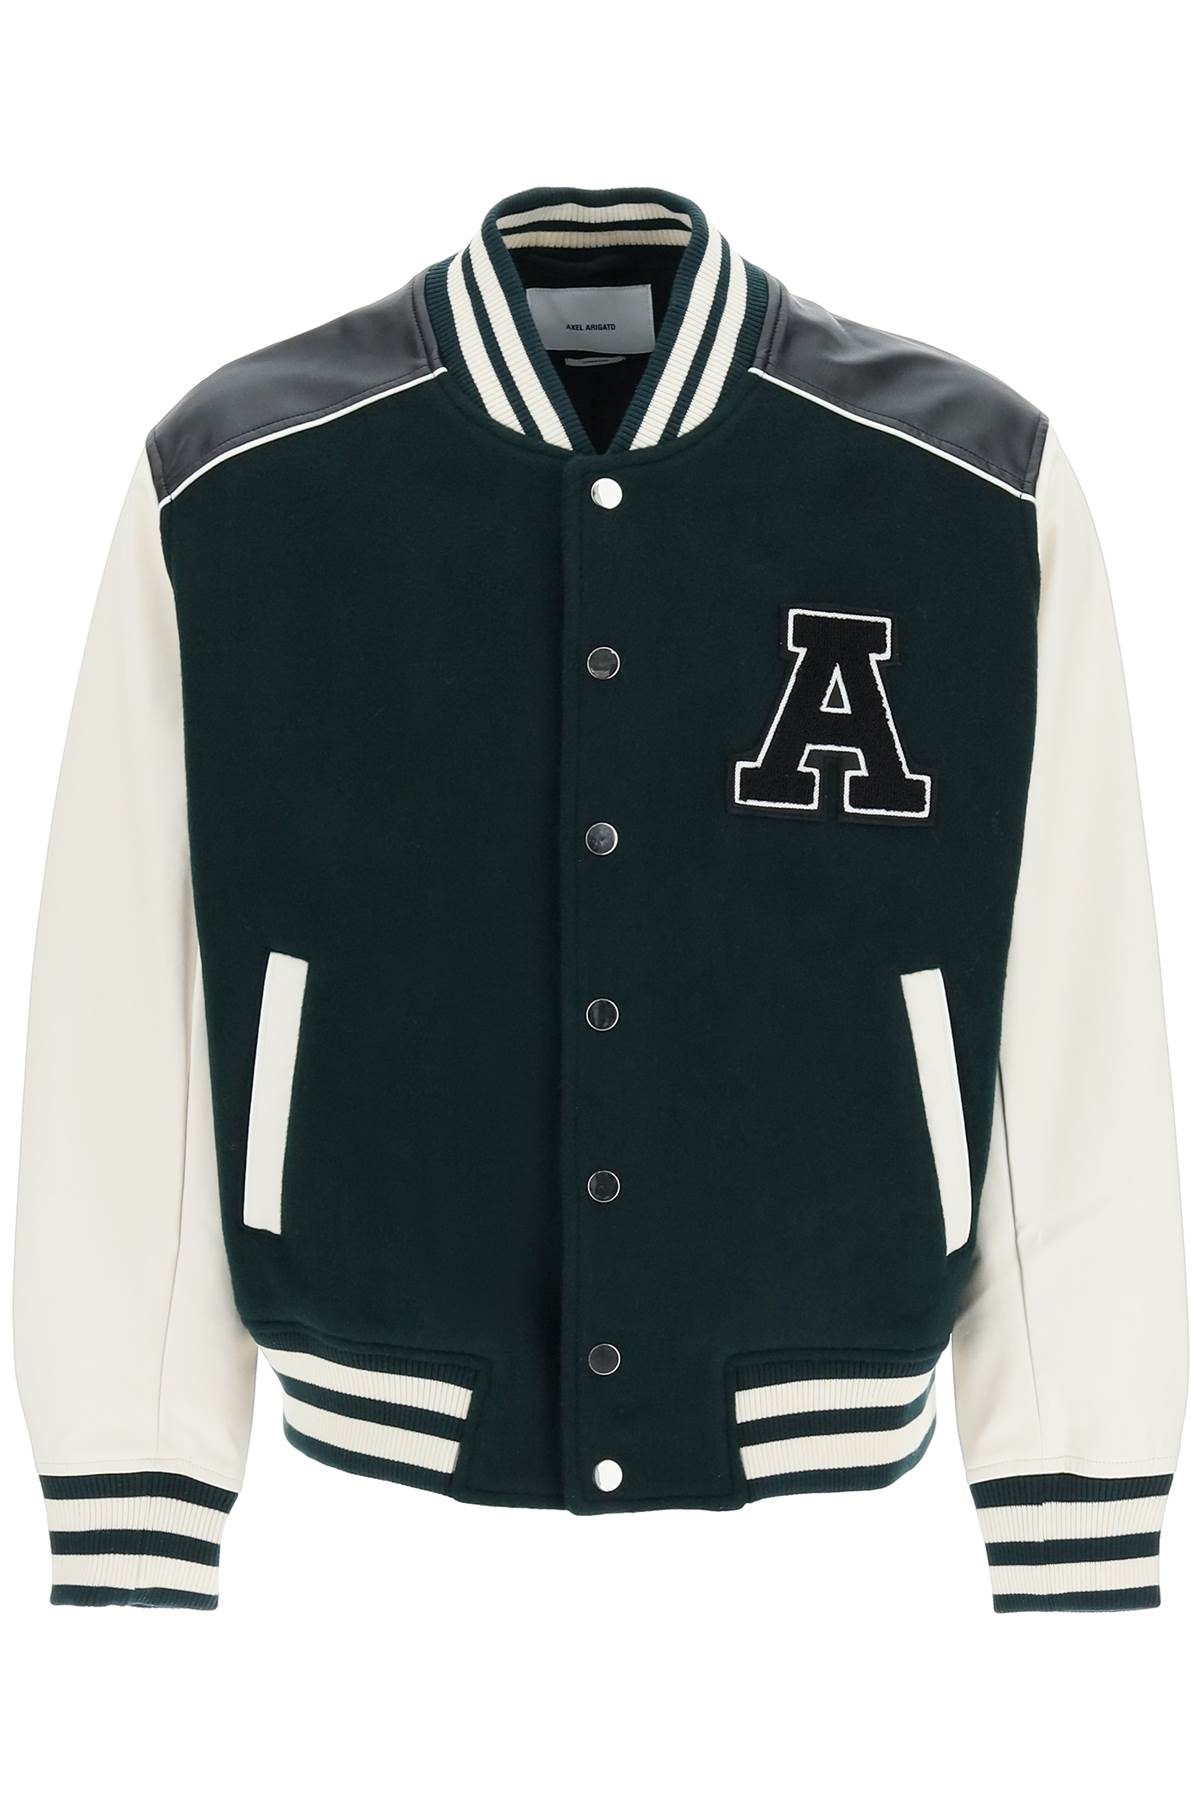 Axel Arigato ivy Varsity Bomber Jacket With Faux Leather Sleeves